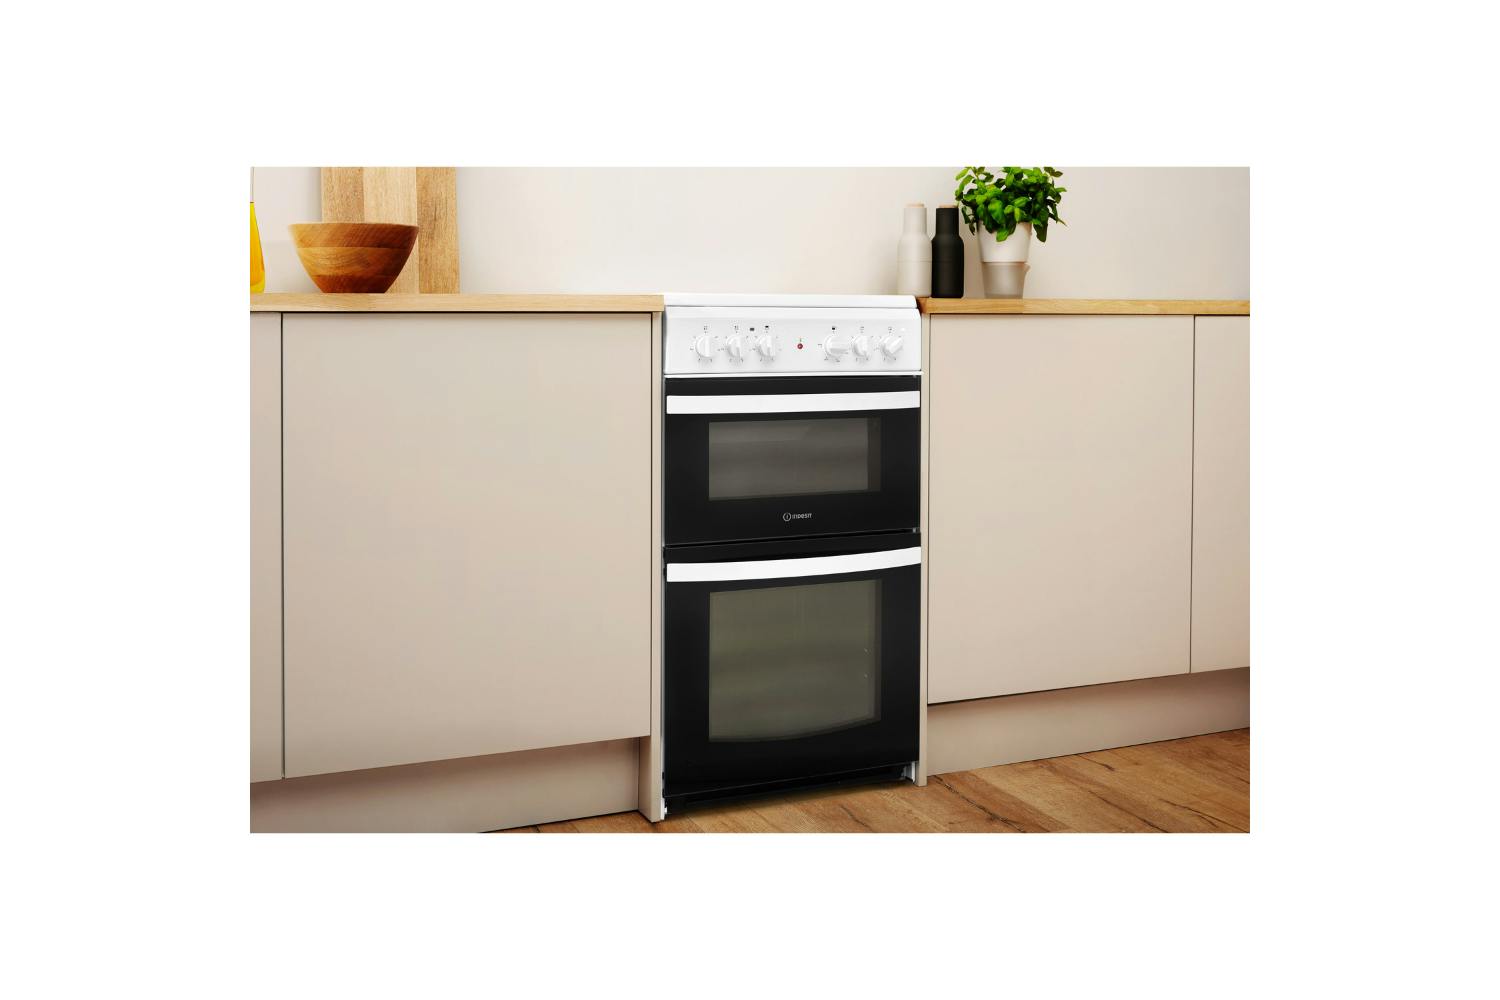 Indesit 50cm Electric Twin Cooker | ID5V92KMW/UK | White